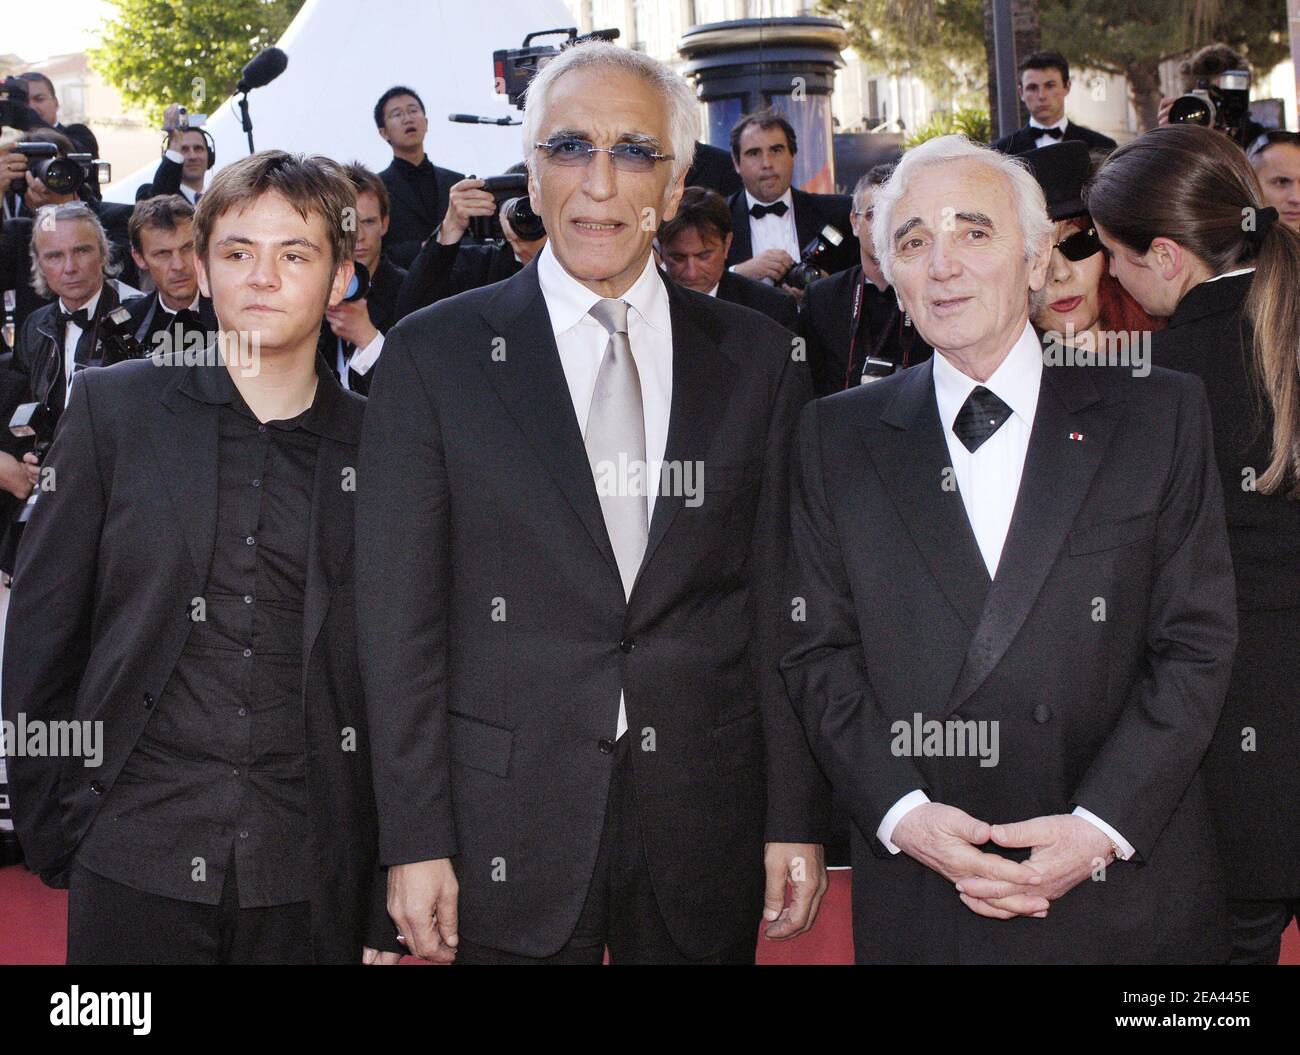 (L-R) Damien Jouillerot, Gerard Darmon and Charles Aznavour arrive for the screening of the film 'Peindre ou faire l'amour' directed by Arnaud and Jean-Marie Larrieu during the 58th International Film Festival, in Cannes, southern France, on May 18, 2005. Photo by Hahn-Nebinger-Klein/ABACA. Stock Photo